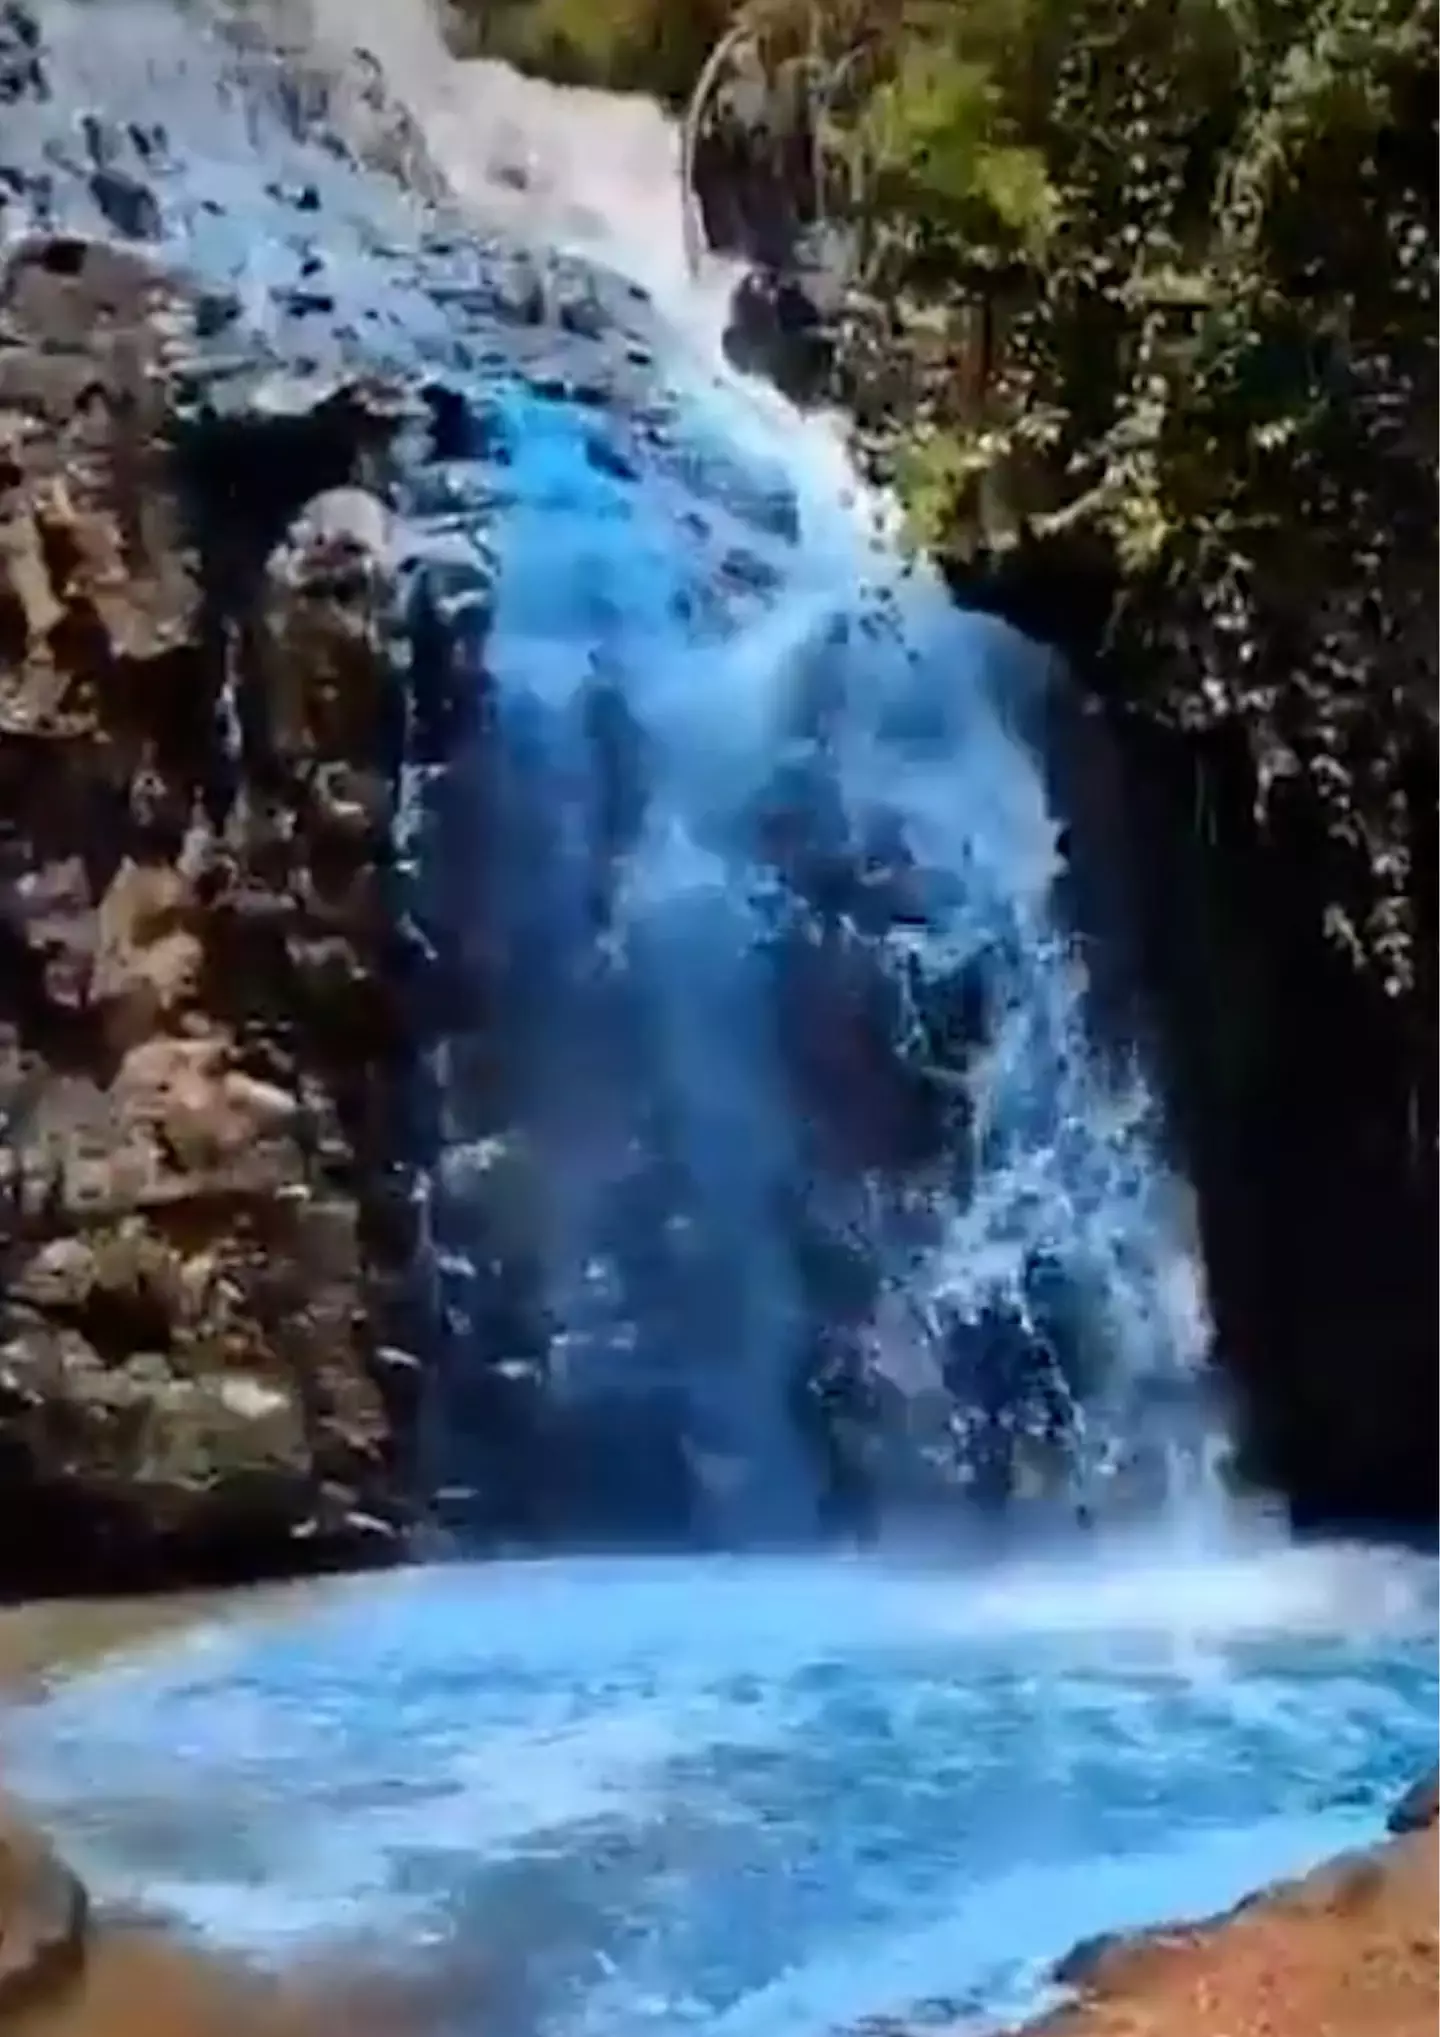 The natural waterfall was dyed blue for the occasion.